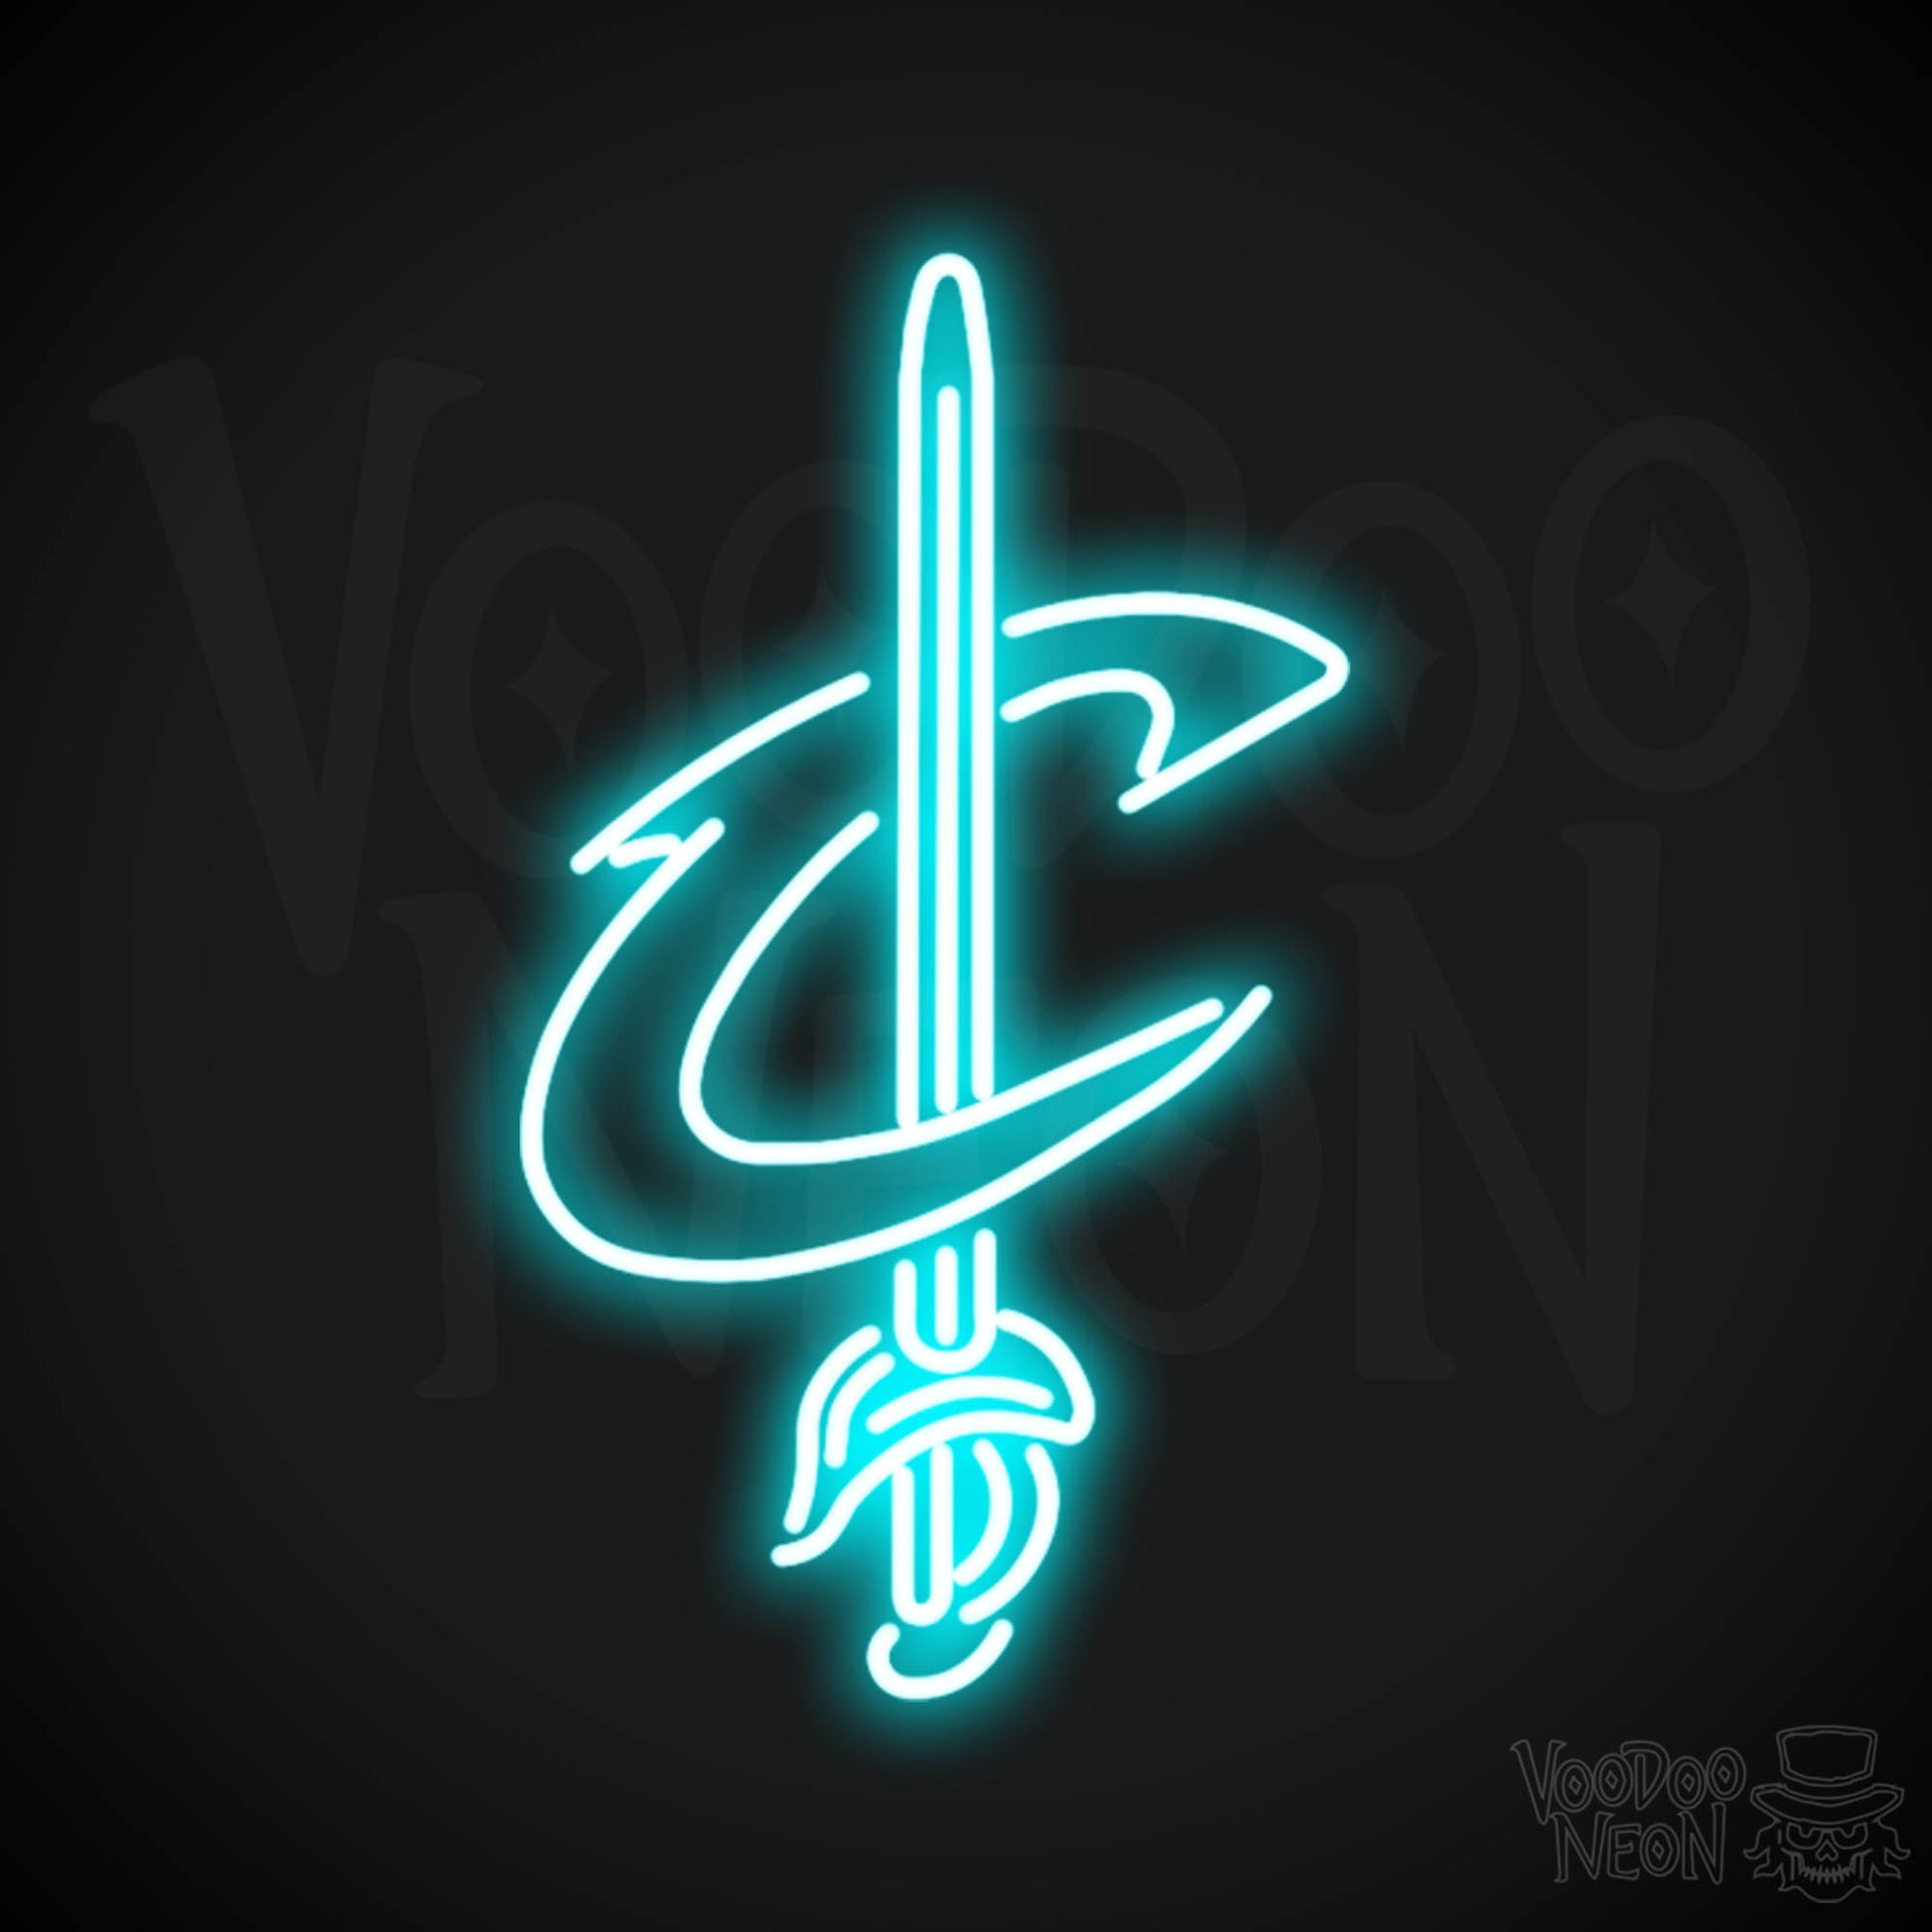 Cleveland Cavaliers Neon Sign - Cleveland Cavaliers Sign - Neon Cavaliers Wall Art - Color Ice Blue